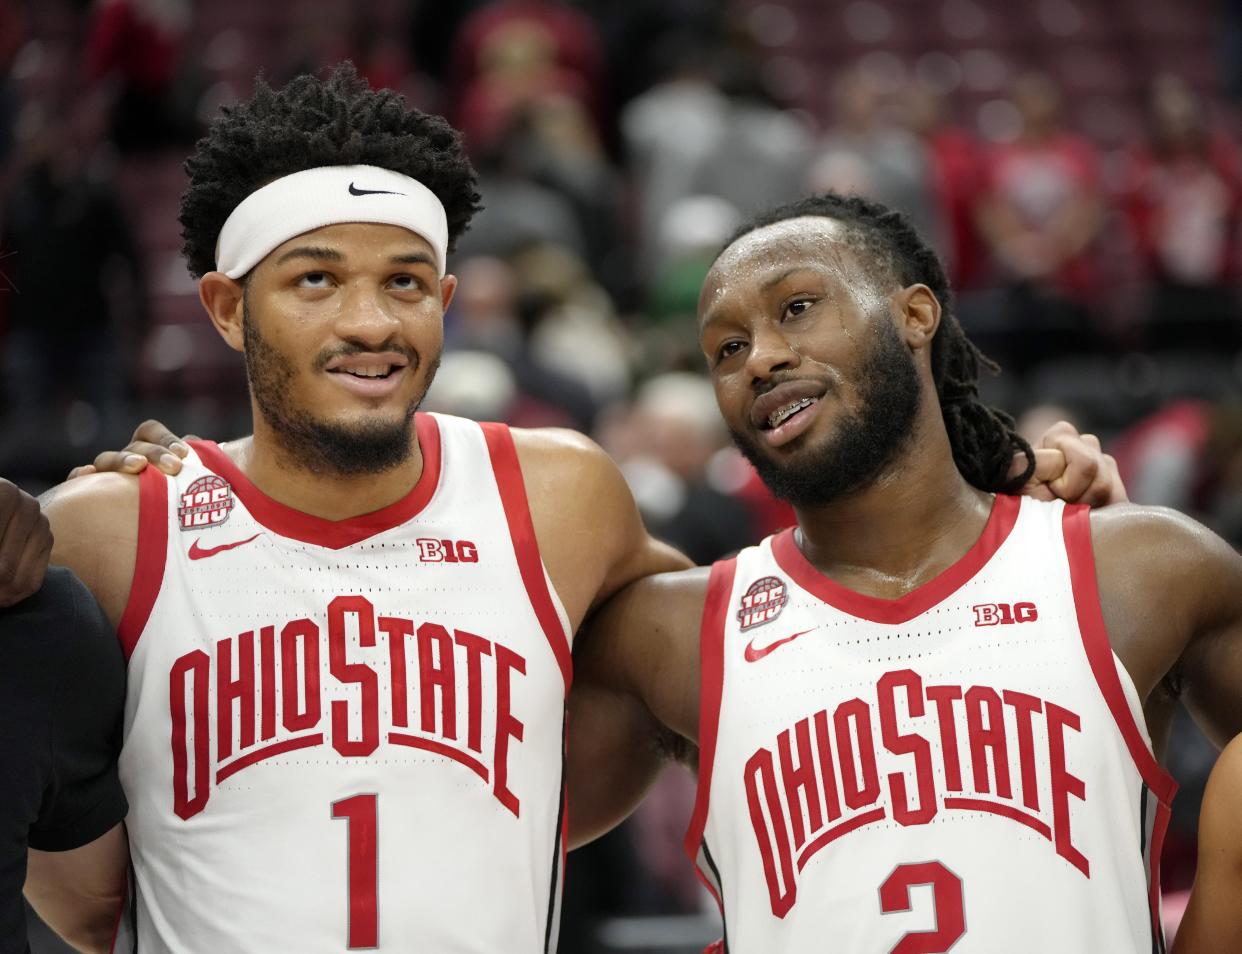 Bruce Thornton (2) announced he will return to Ohio State next season, but Roddy Gayle Jr. (1) said he will enter the transfer portal.